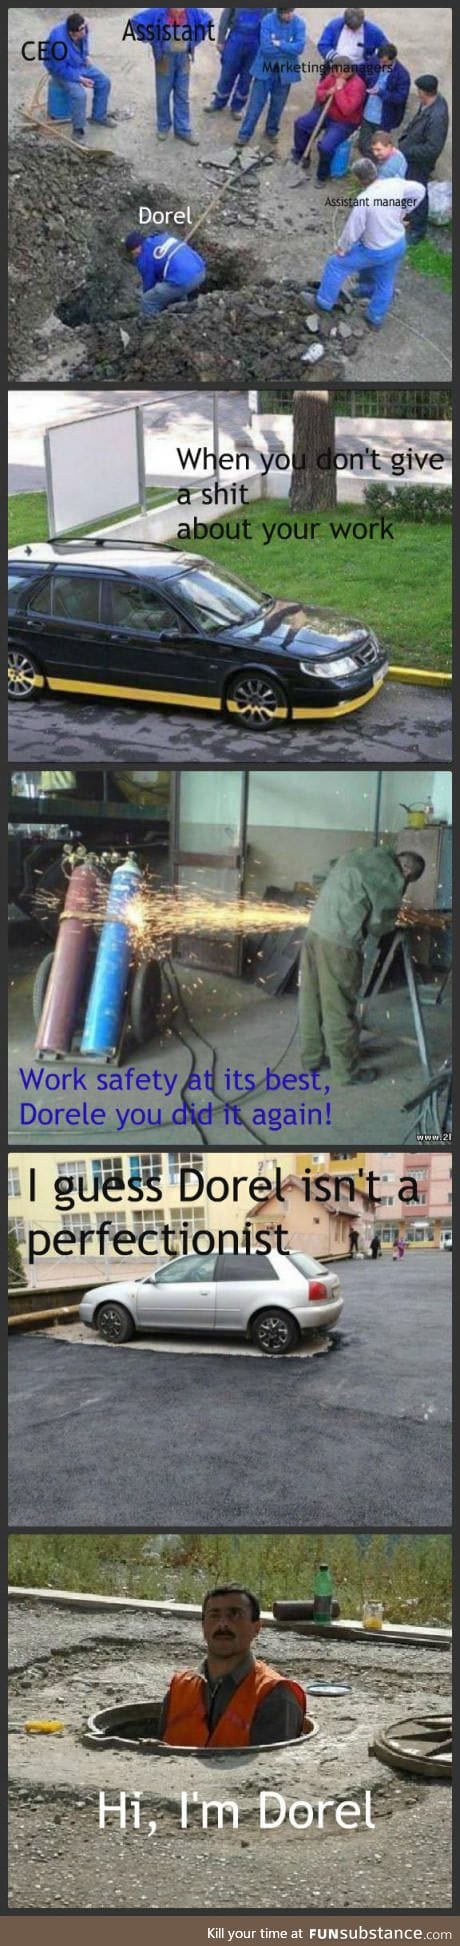 We have THAT clumsy guy here in Romania, we call him Dorel, any1 can relate?